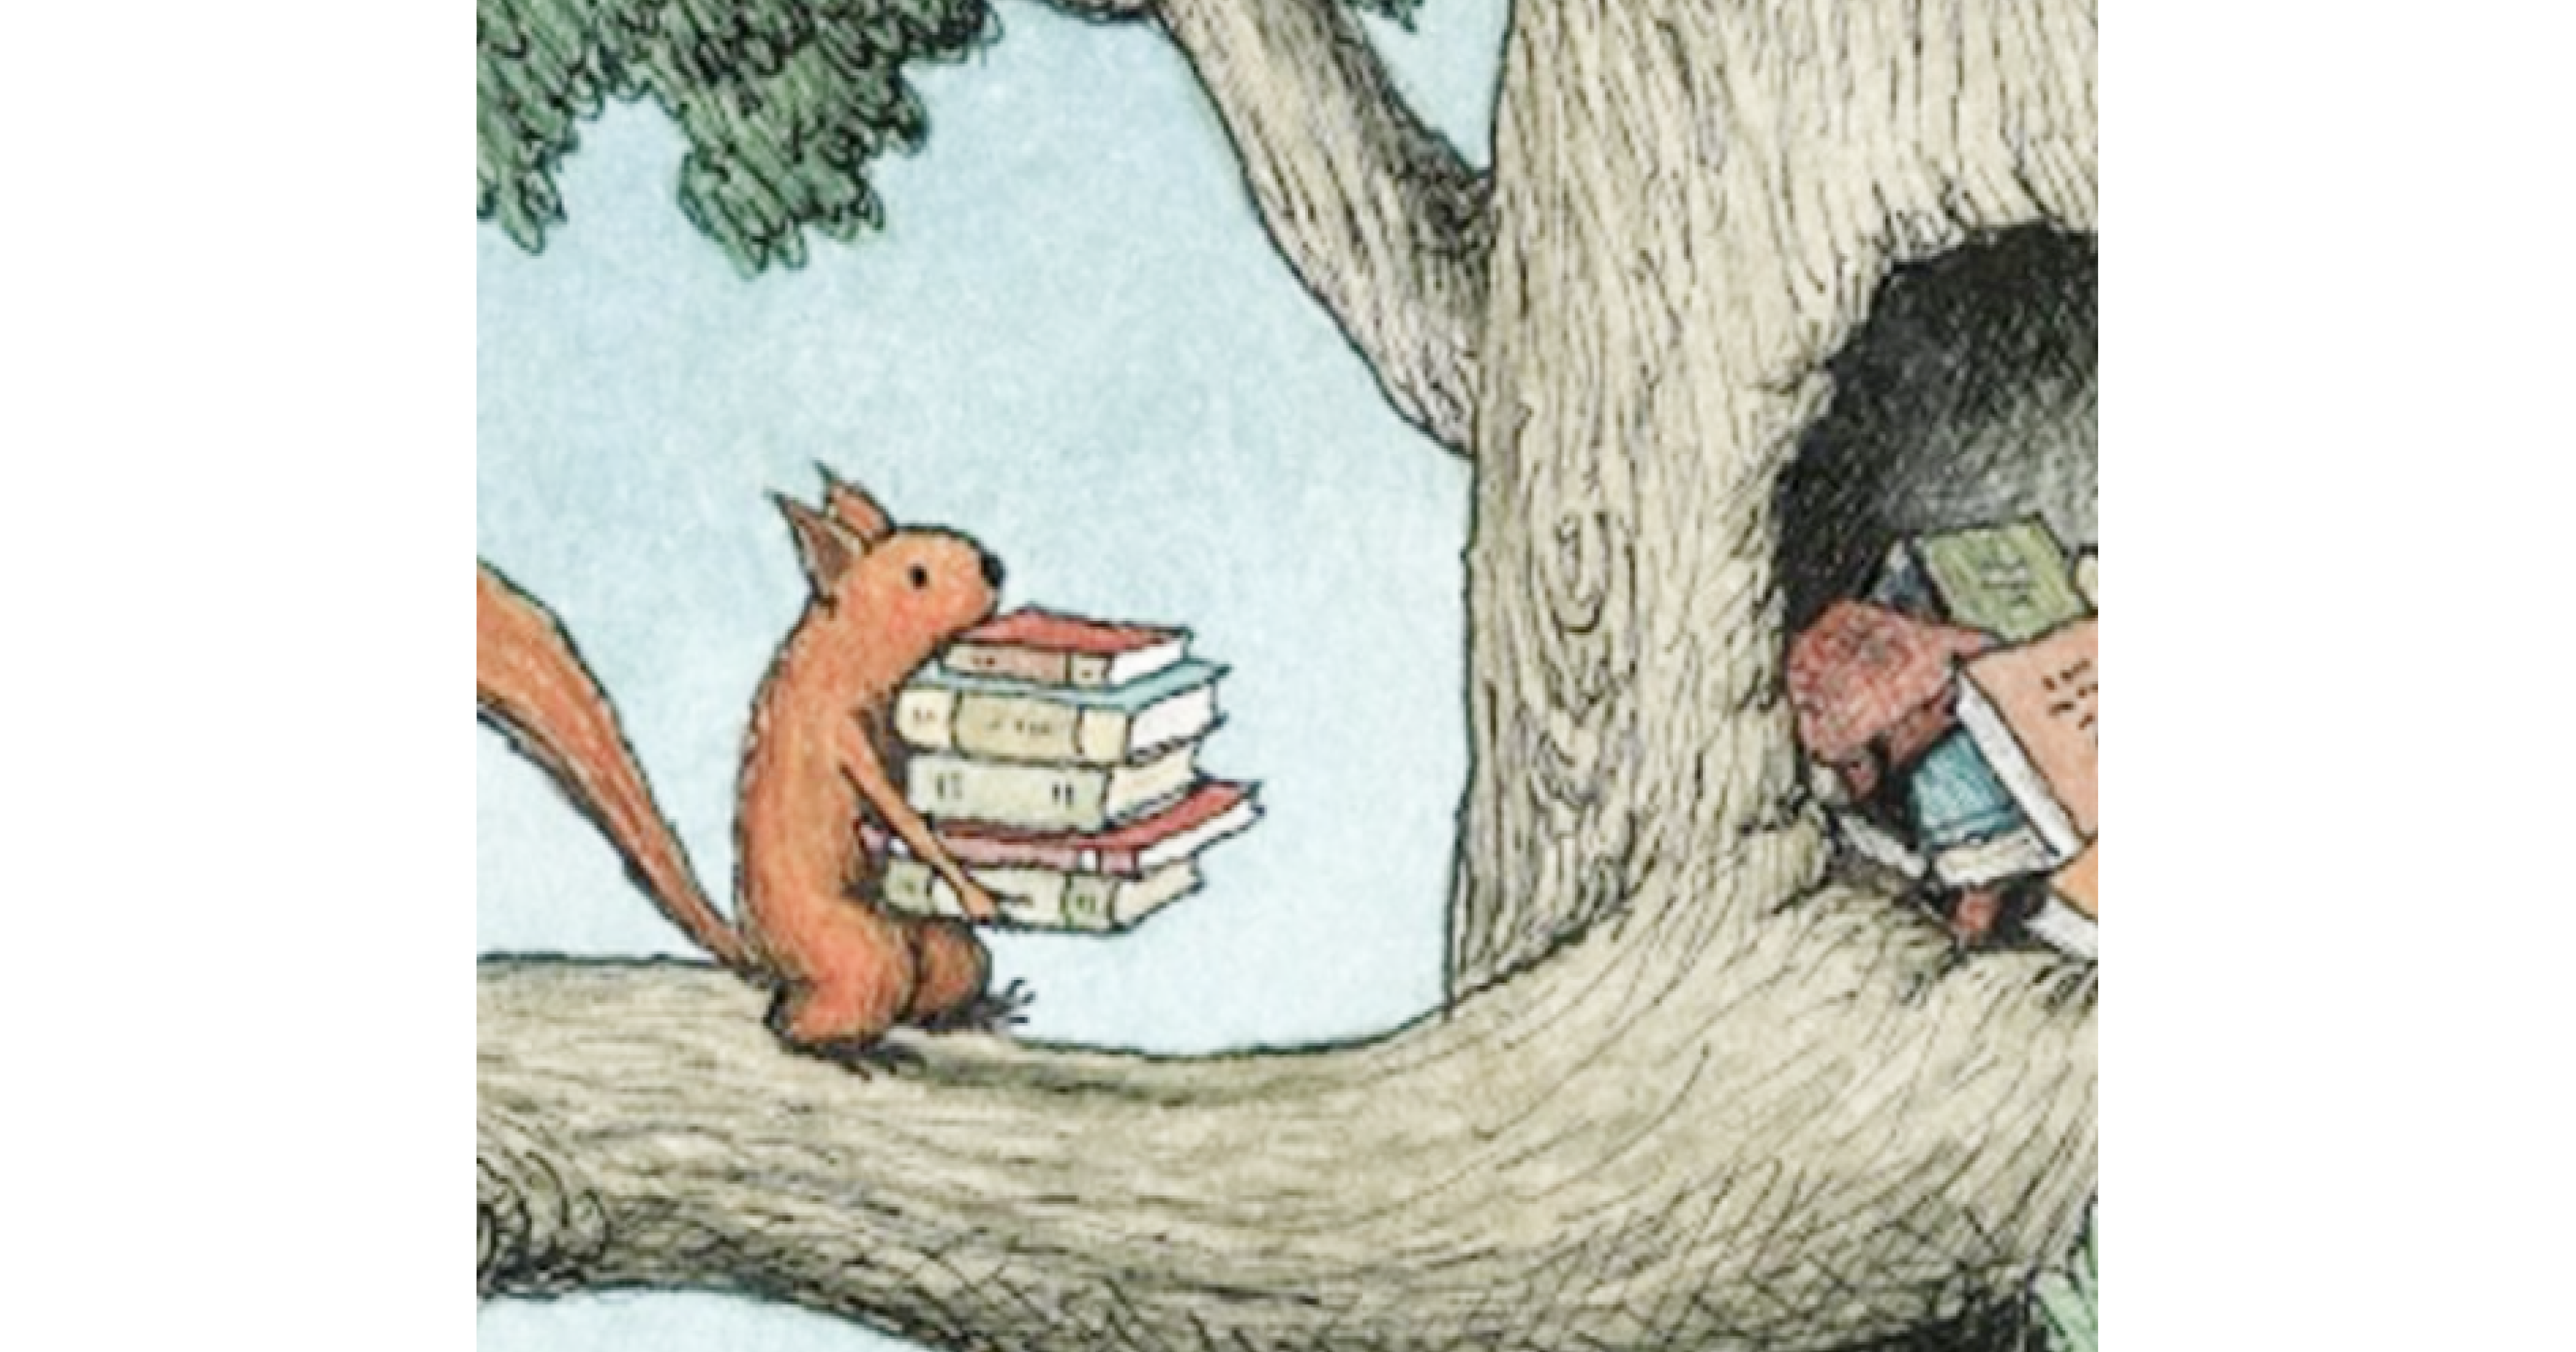 A squirrel carries a pile of books into its hole in the tree